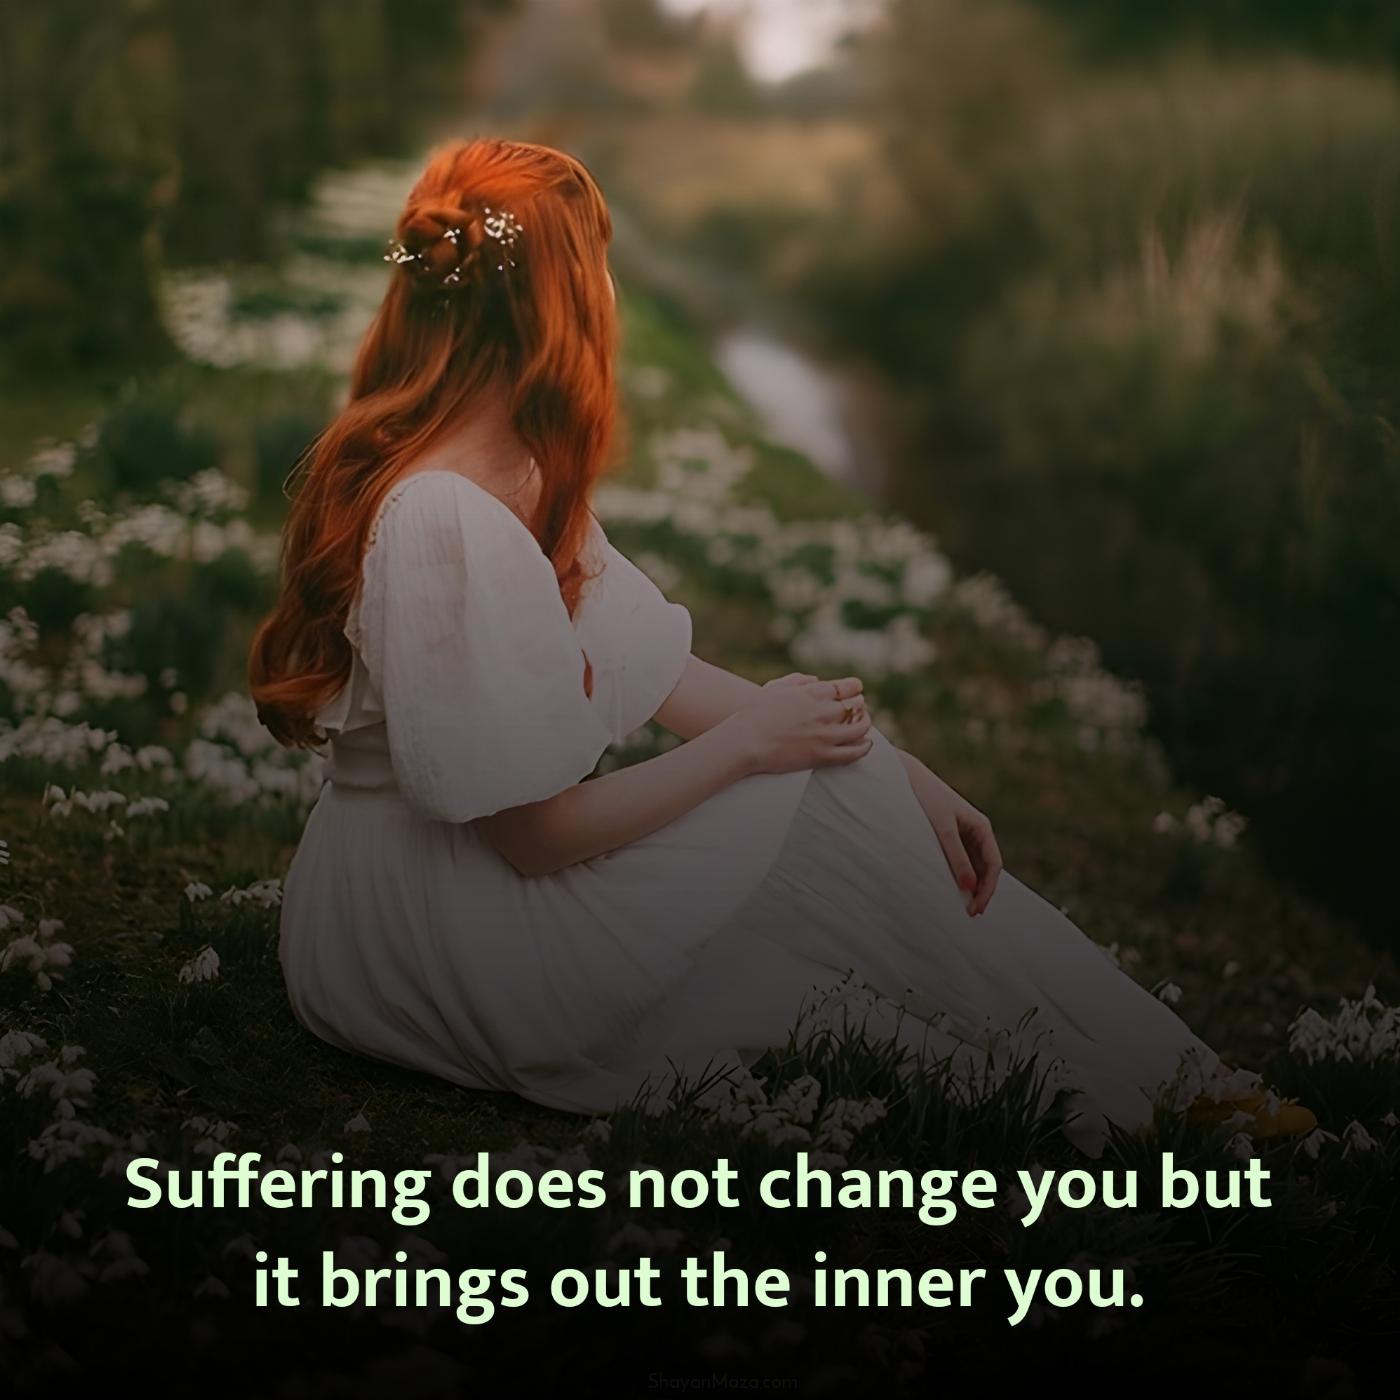 Suffering does not change you but it brings out the inner you